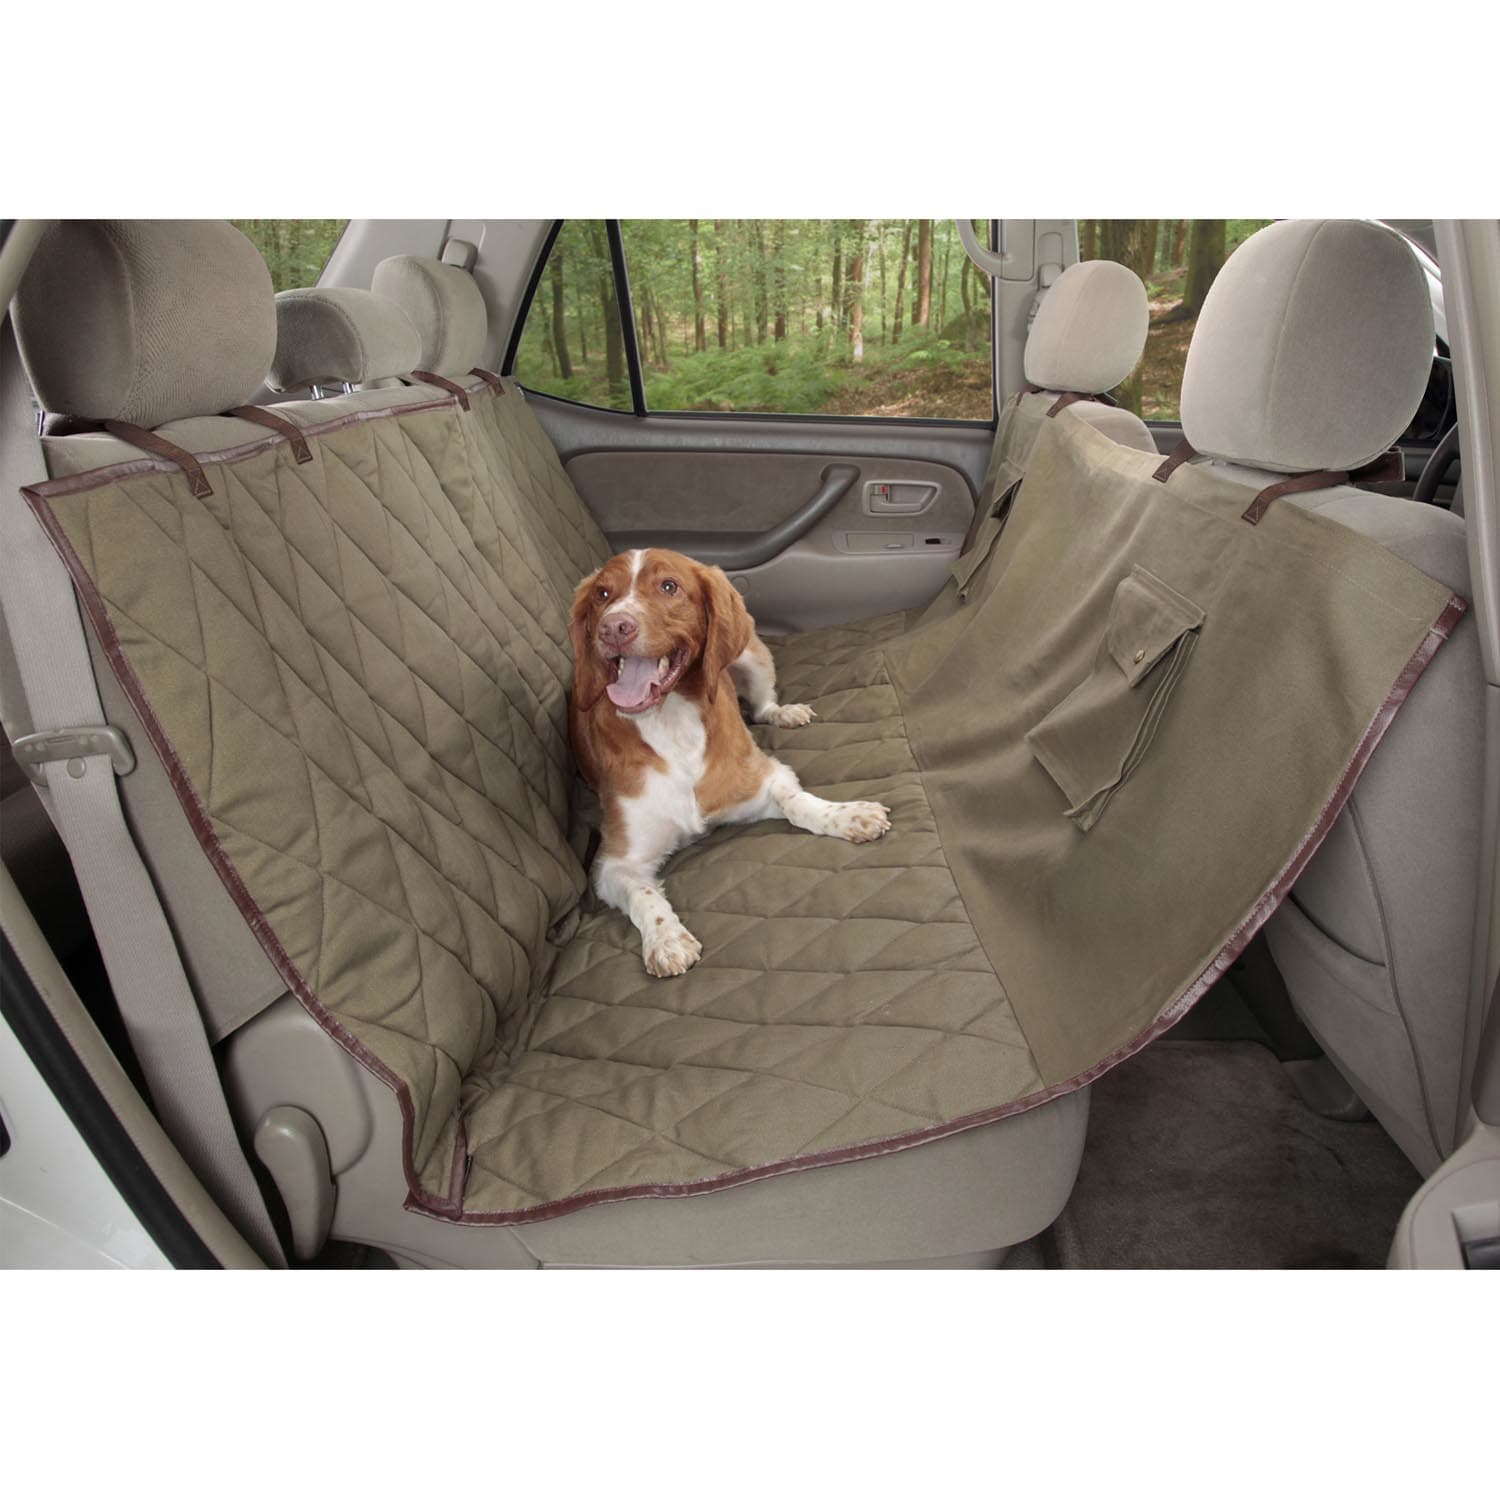 Deluxe Quilted and Padded Car Seat Cover For Dog Pet Extra Length Coverage.Khaki 